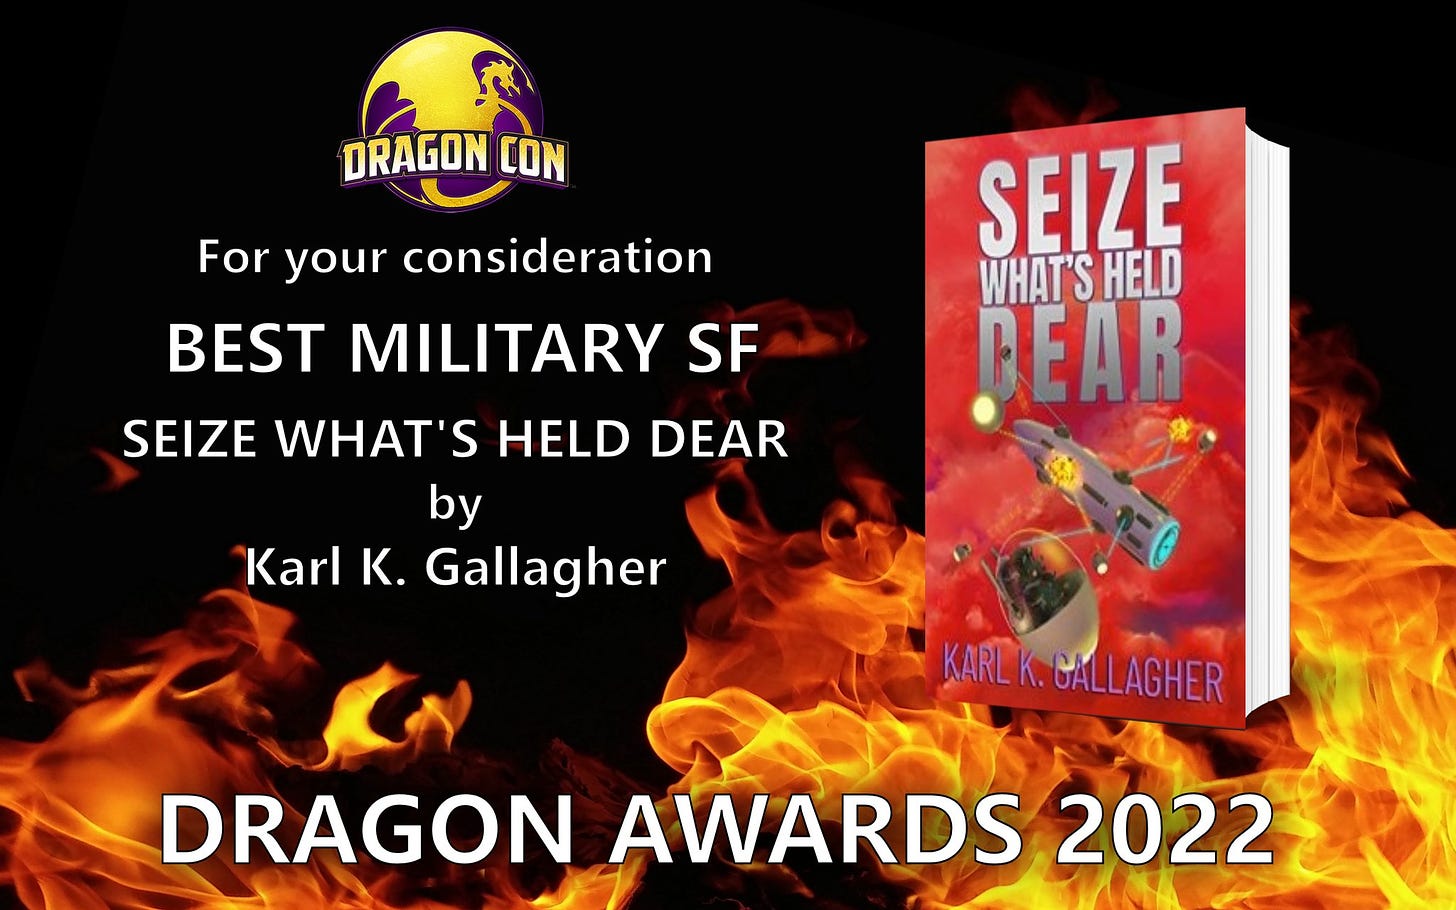 May be a cartoon of fire and text that says 'DRAGON CON For your consideration BEST MILITARY SF SEIZE WHAT'S HELD DEAR by Kar Κ. Gallagher SEIZE WHAT'S HELD DEAR KARLK.GALLAGHER KARL GALLAGHER DRAGON AWARDS 2022'